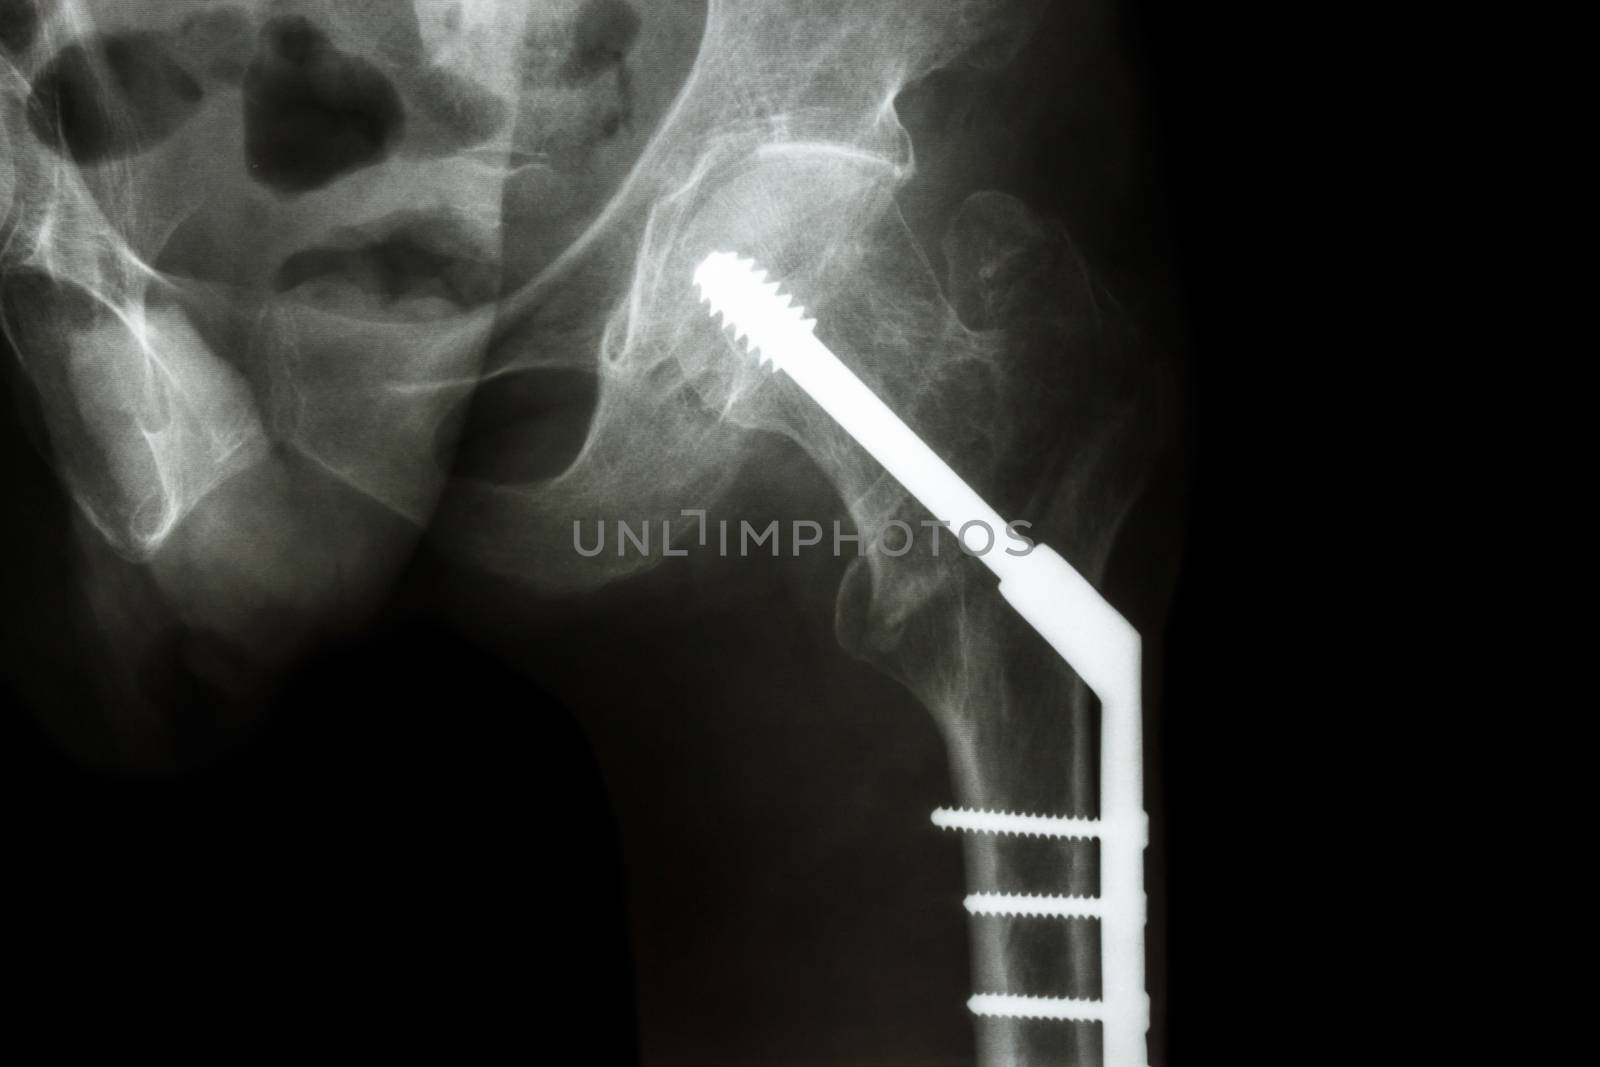 film x-ray left hip : show fracture neck of femur(thigh's bone). patient was operated and fixed bone by screw